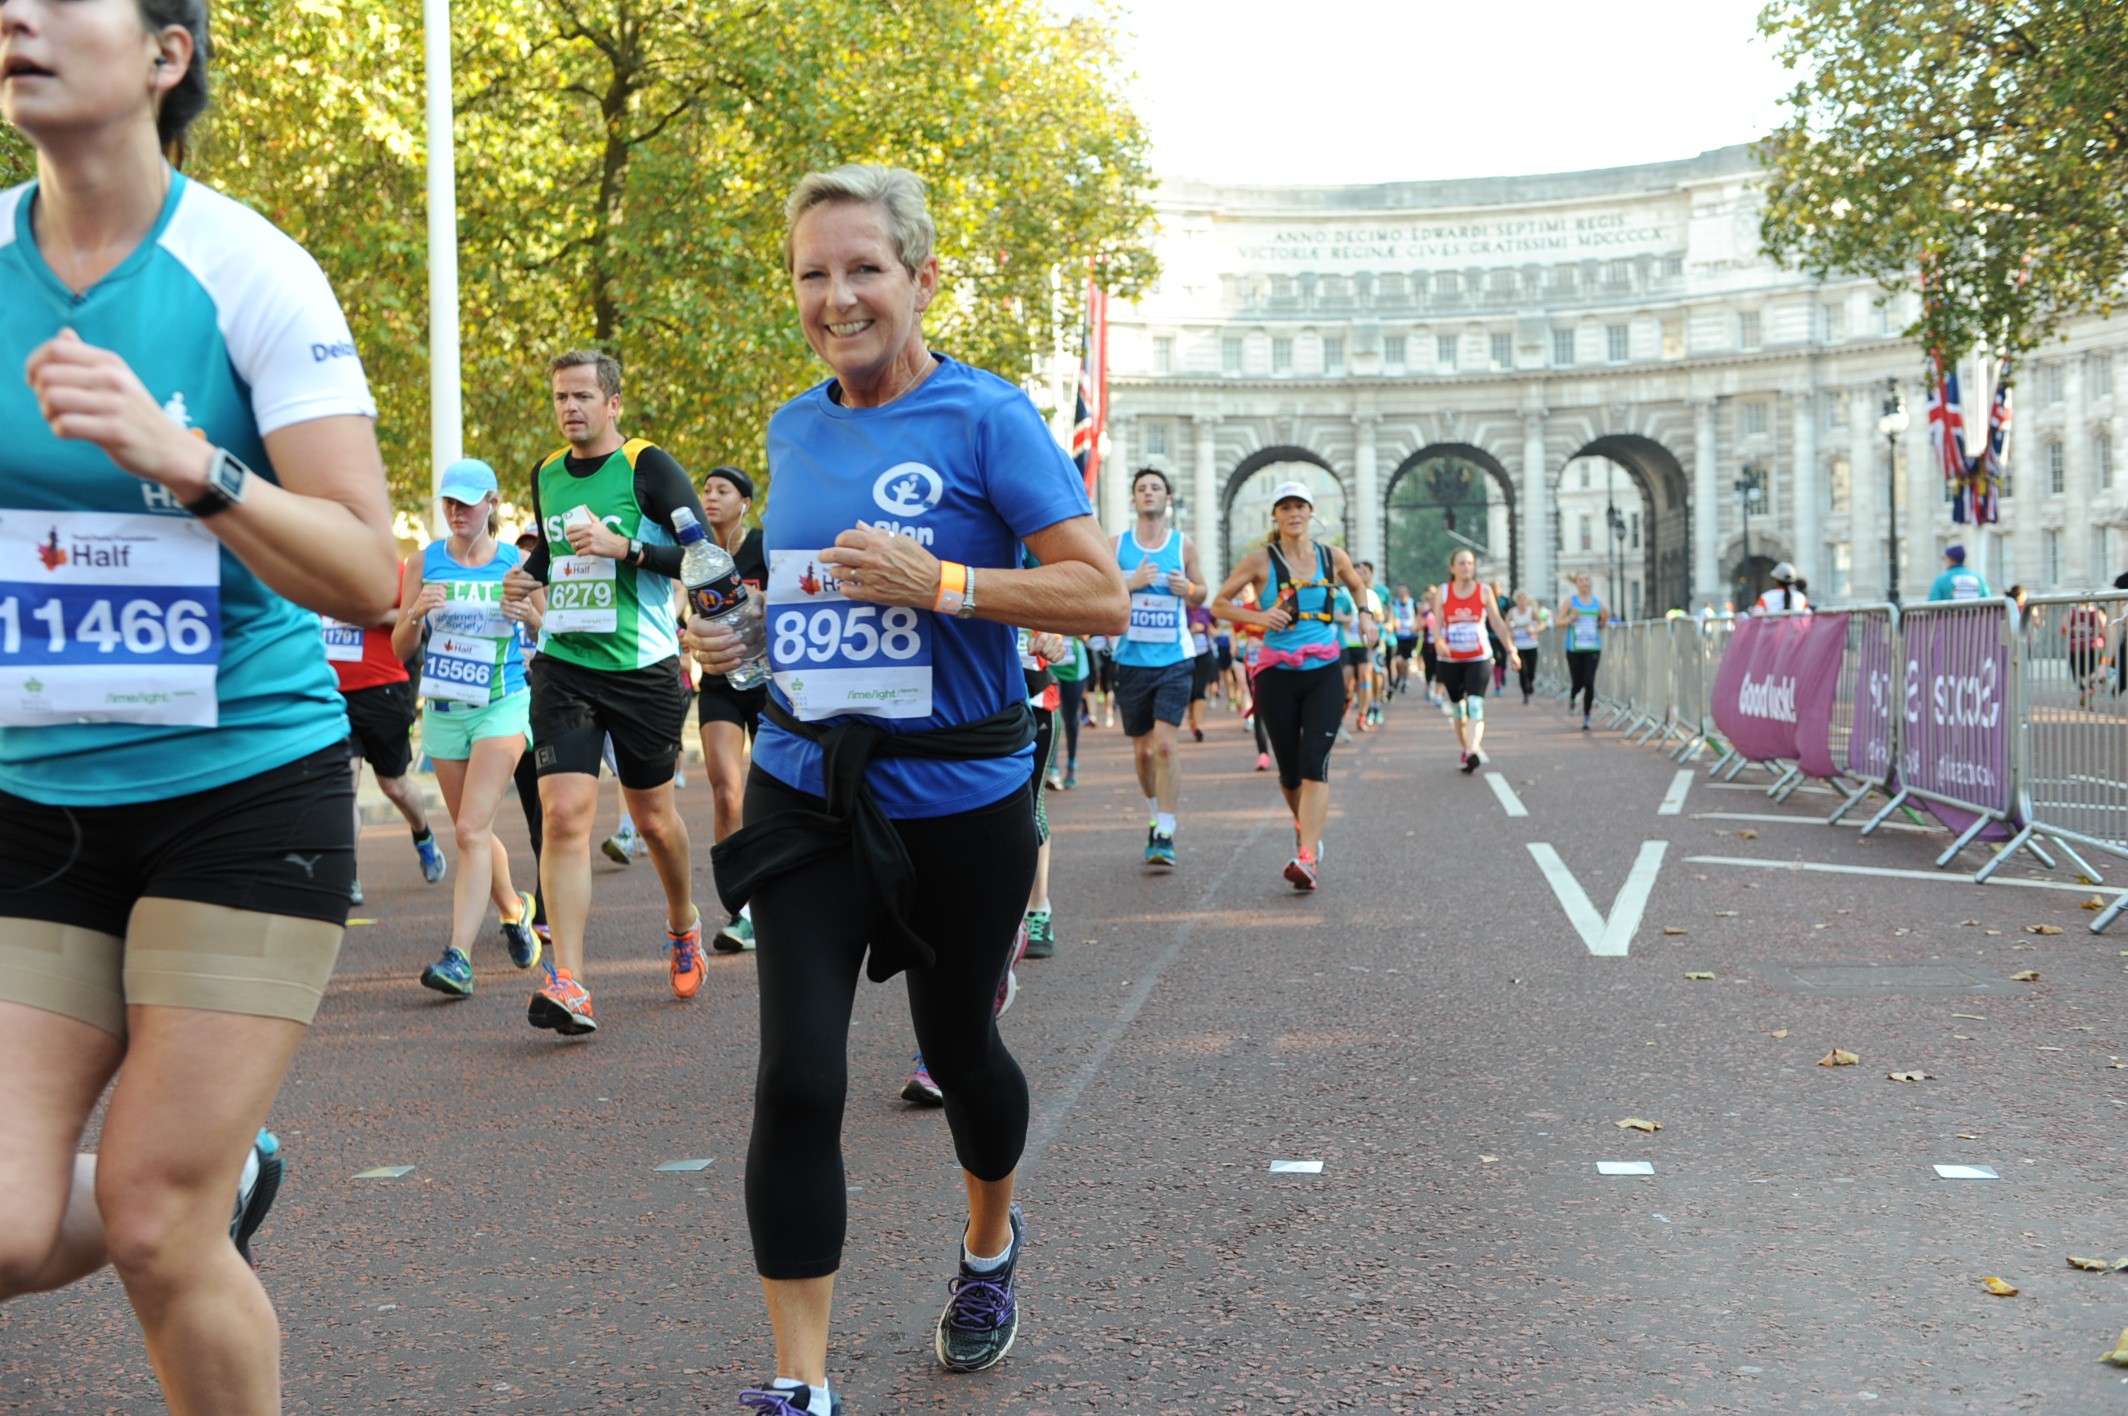 Jan taking part in the Royal Parks run